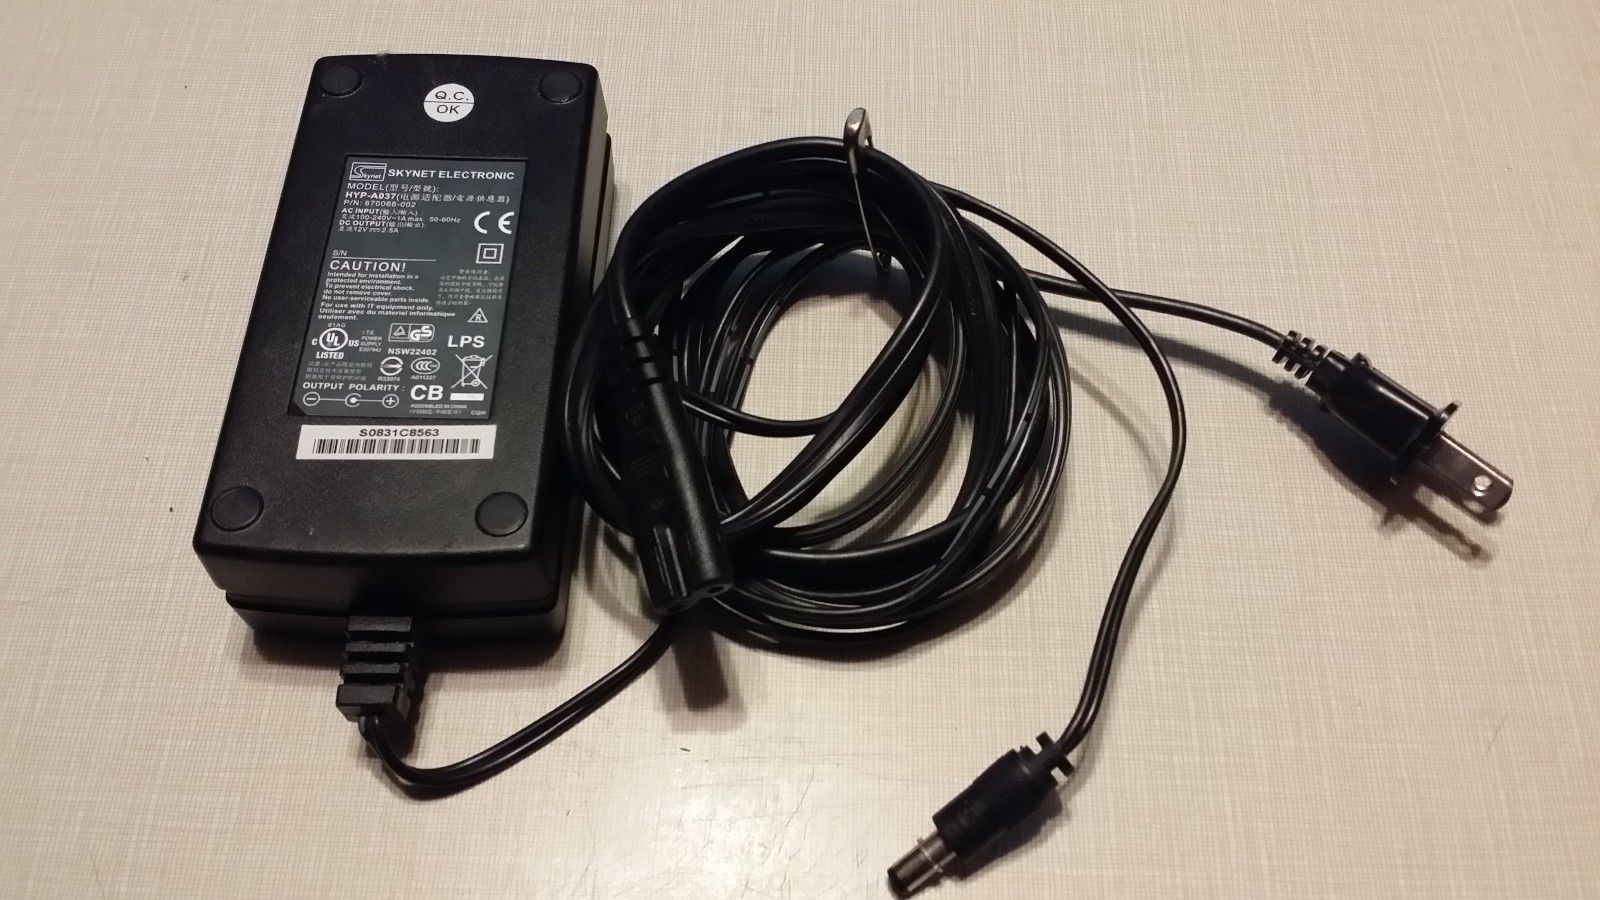 *100% Brand NEW* 12VDC 2.5A AC ADAPTER SKYNET ELECTRONIC 870066-002 HYP-A037 POWER SUPPLY